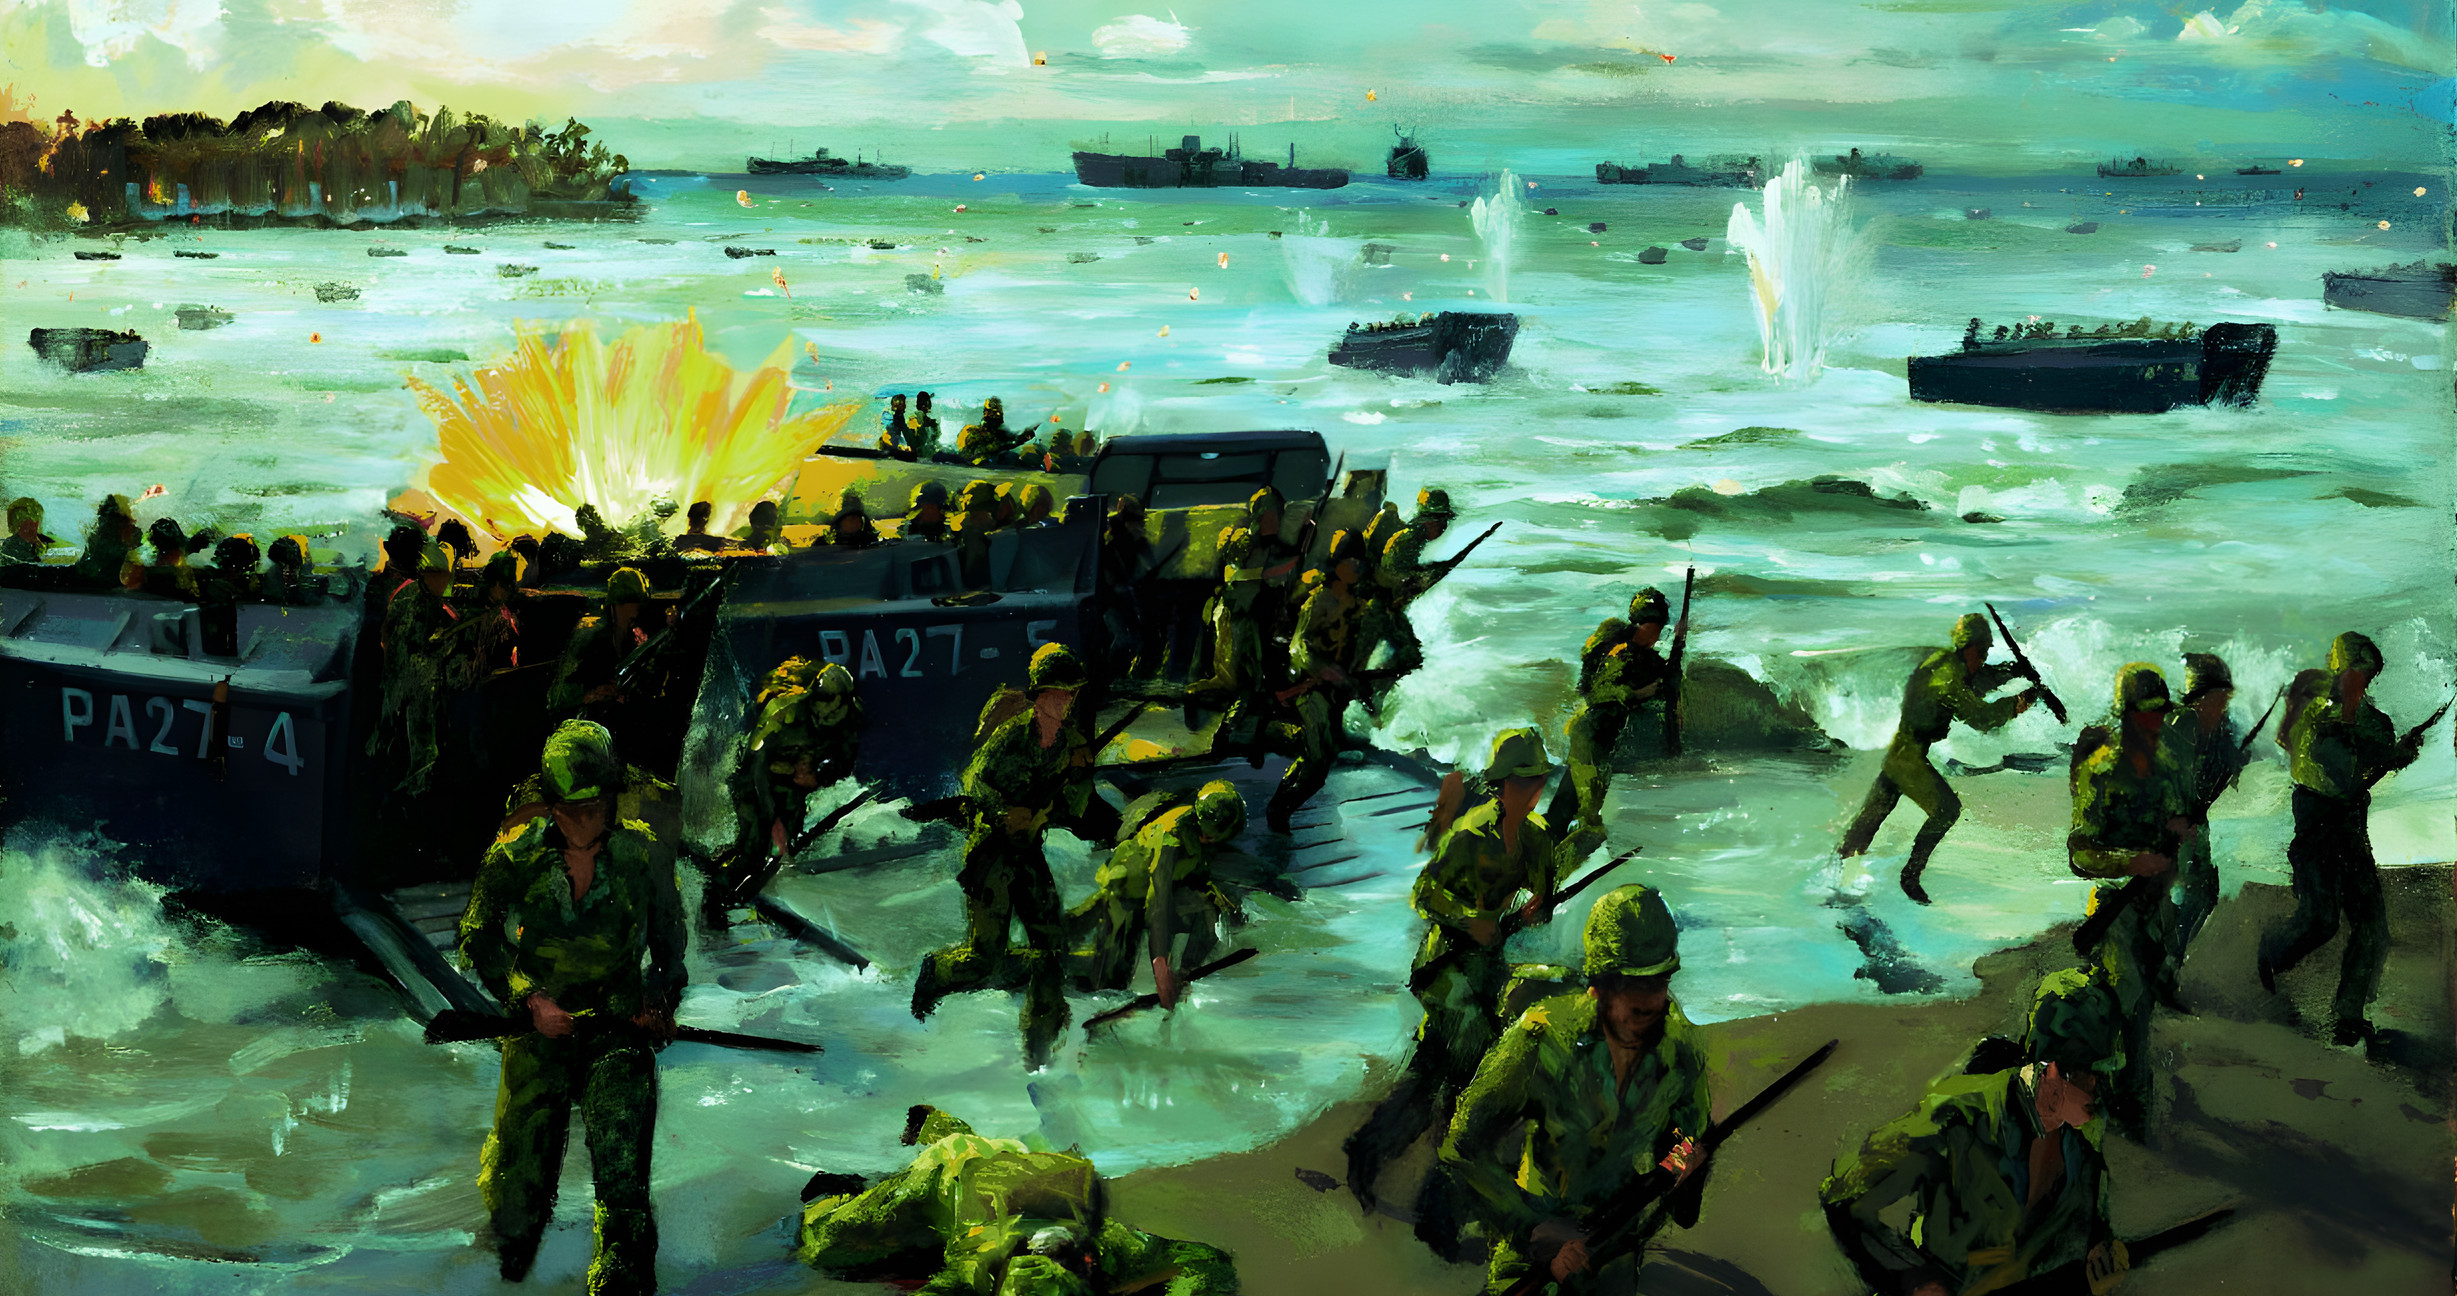 U.S. troops storm ashore during an amphibious landing on Japanese-held Saipan. Navy combat artist William Draper painted the image and titled it The Landing.